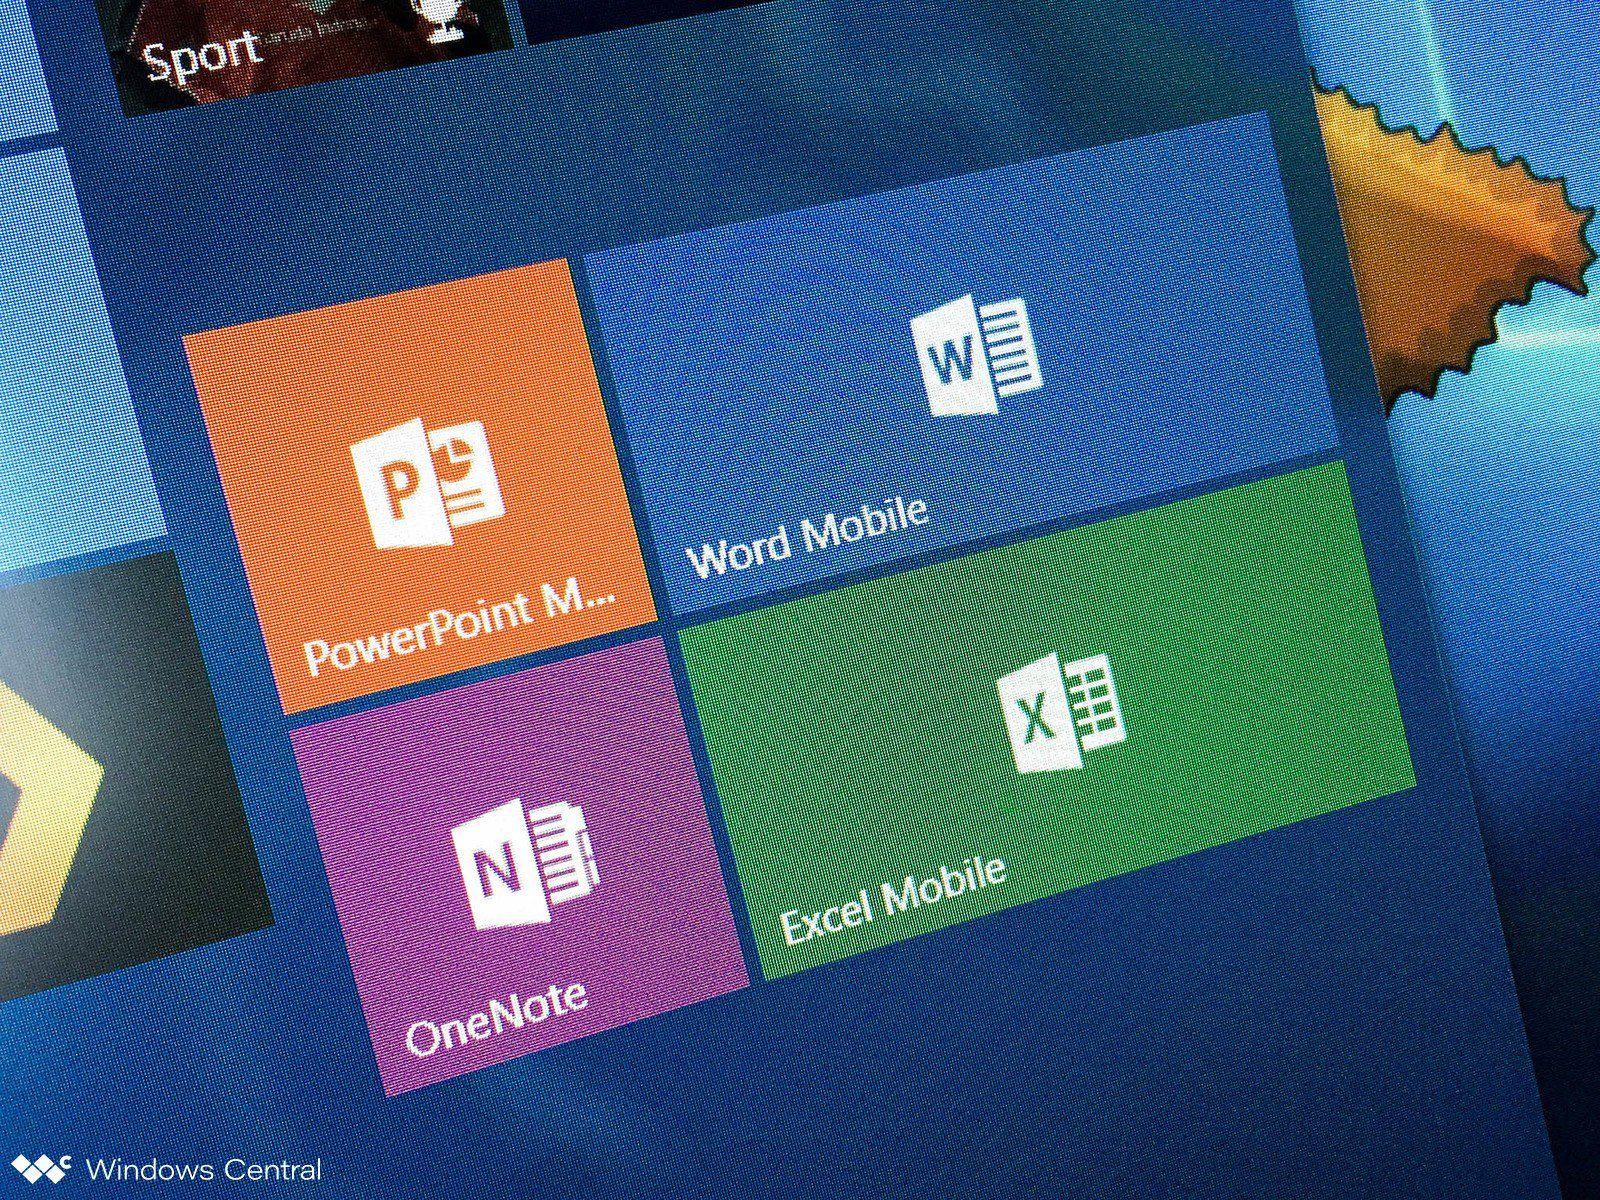 Office Mobile Apps Logo - Why Microsoft's Office Mobile suite is much more than a simple set